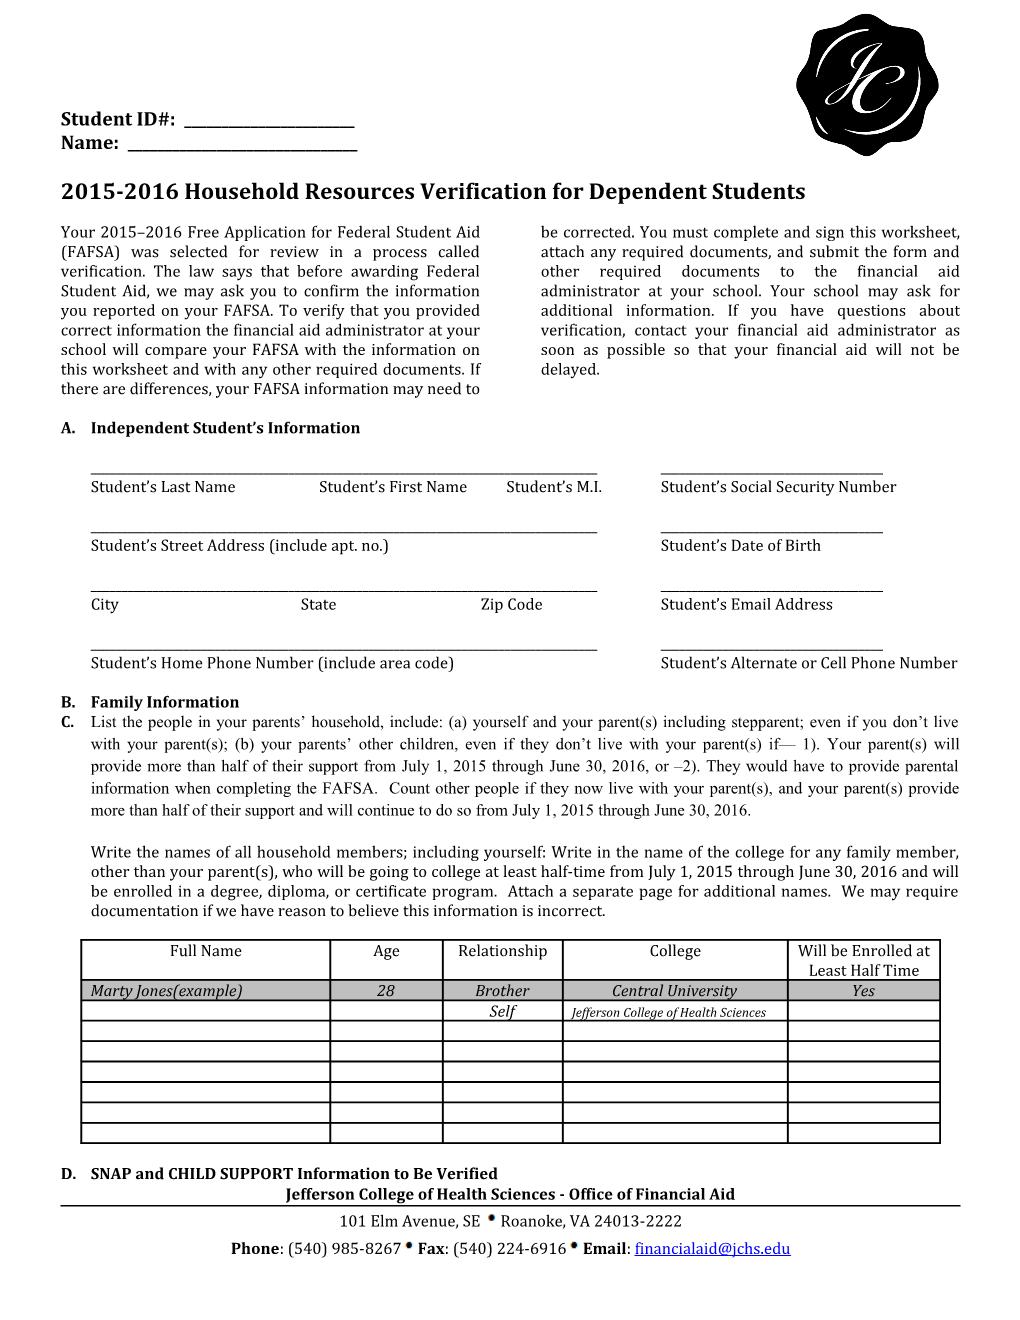 2015-2016 Household Resources Verification for Dependent Students